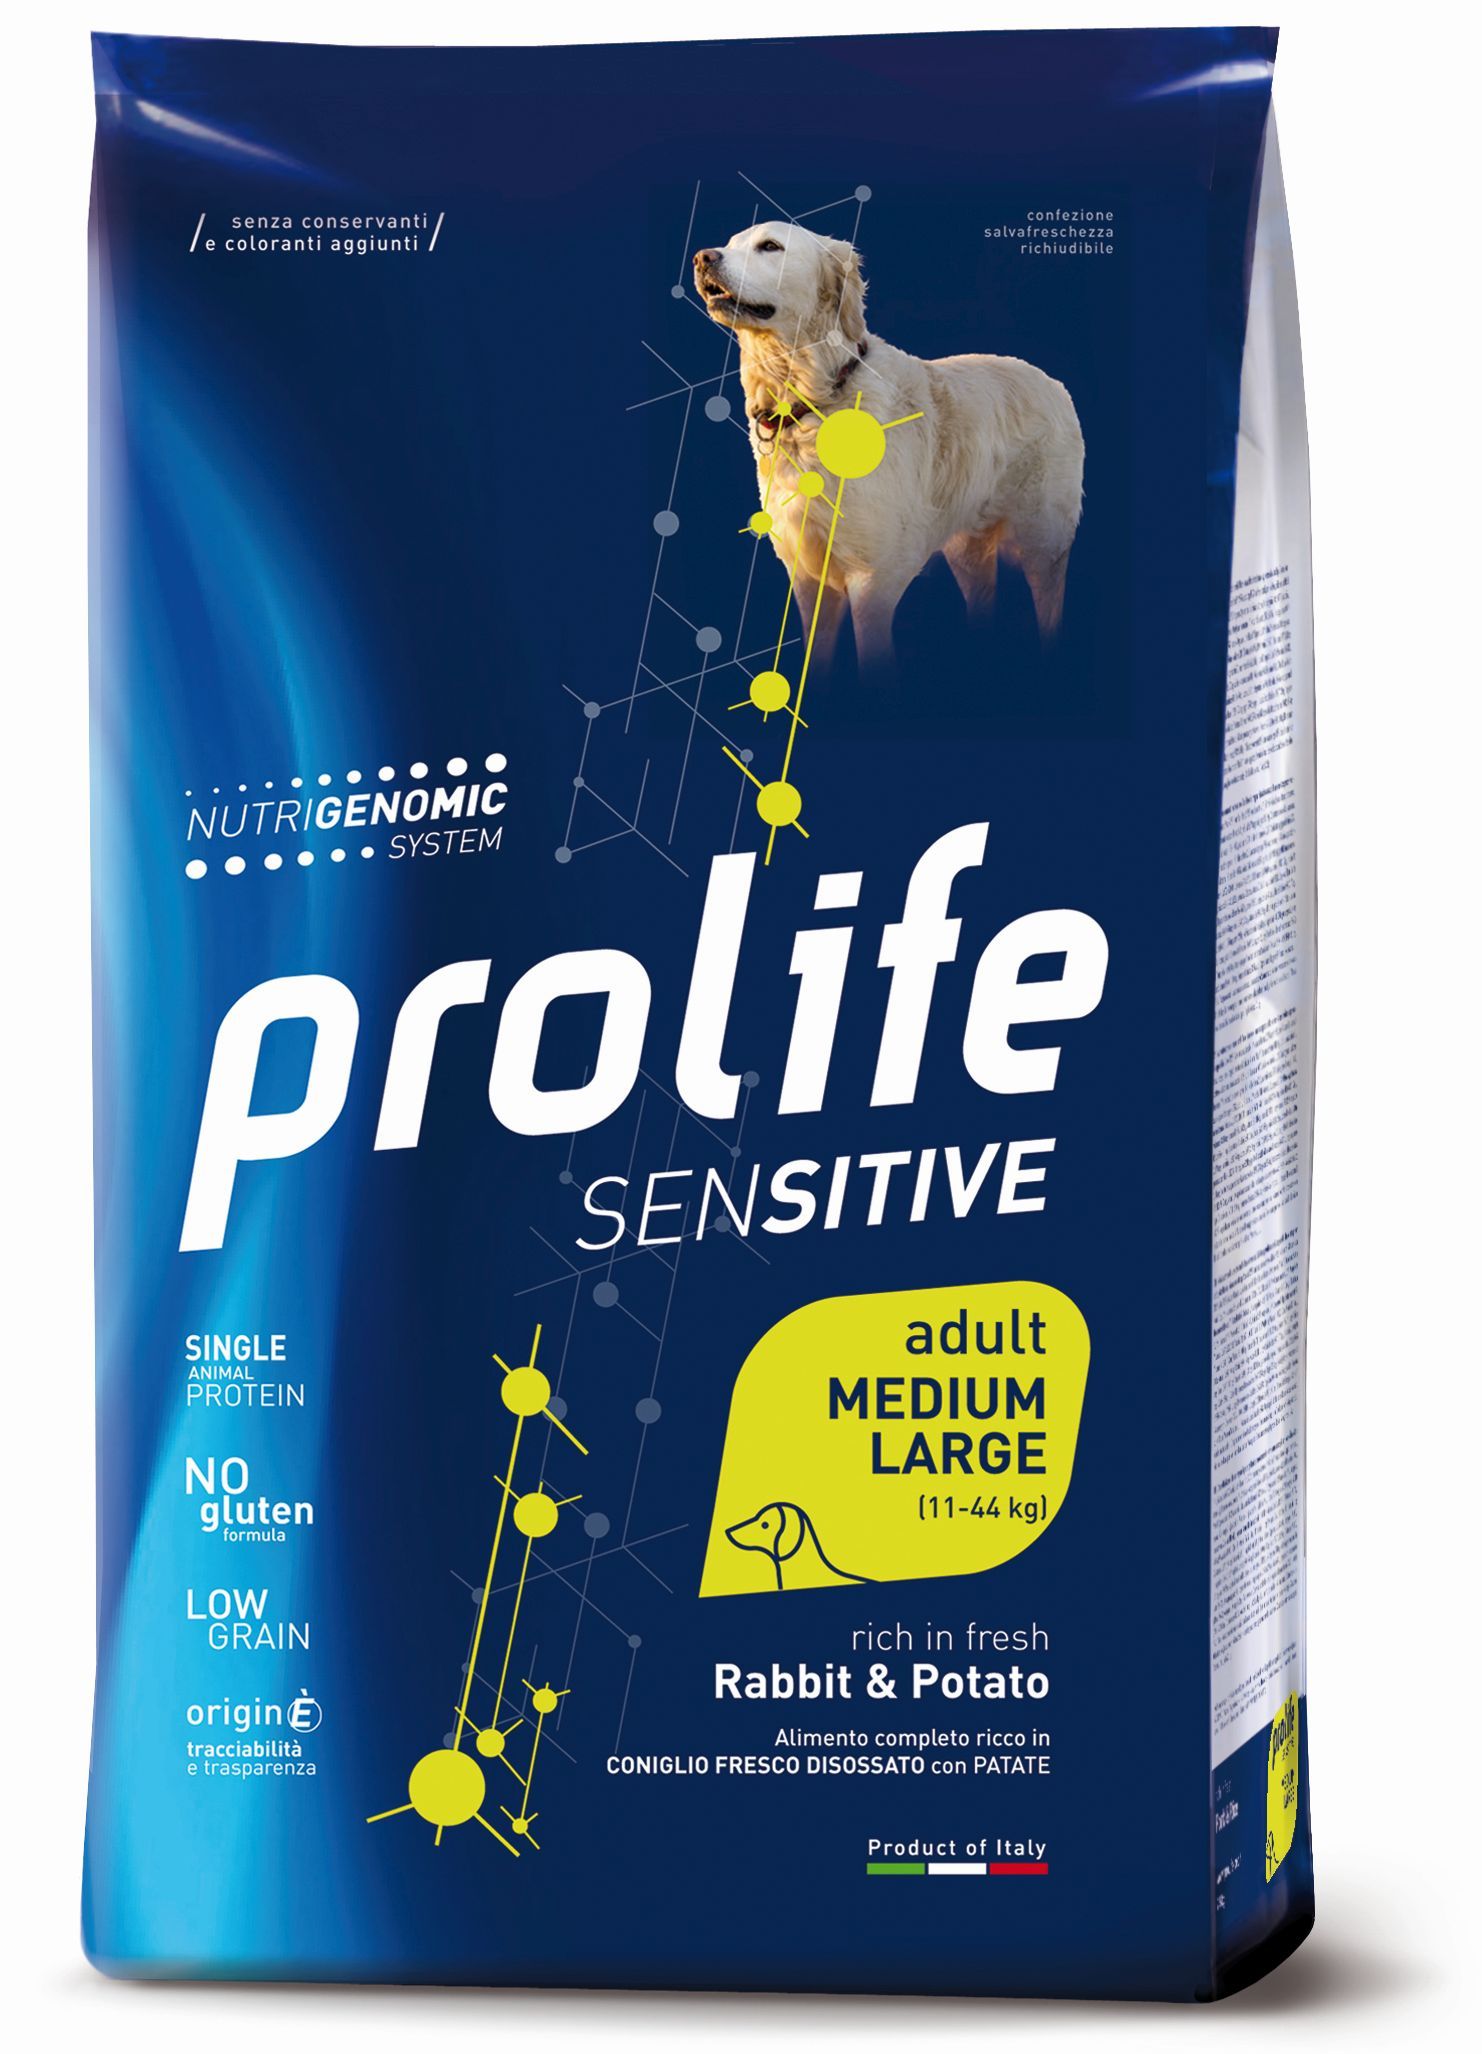 Complete dietetic pet food for small adult dogs, formulated to control glucose intake (diabetes mellitus).
